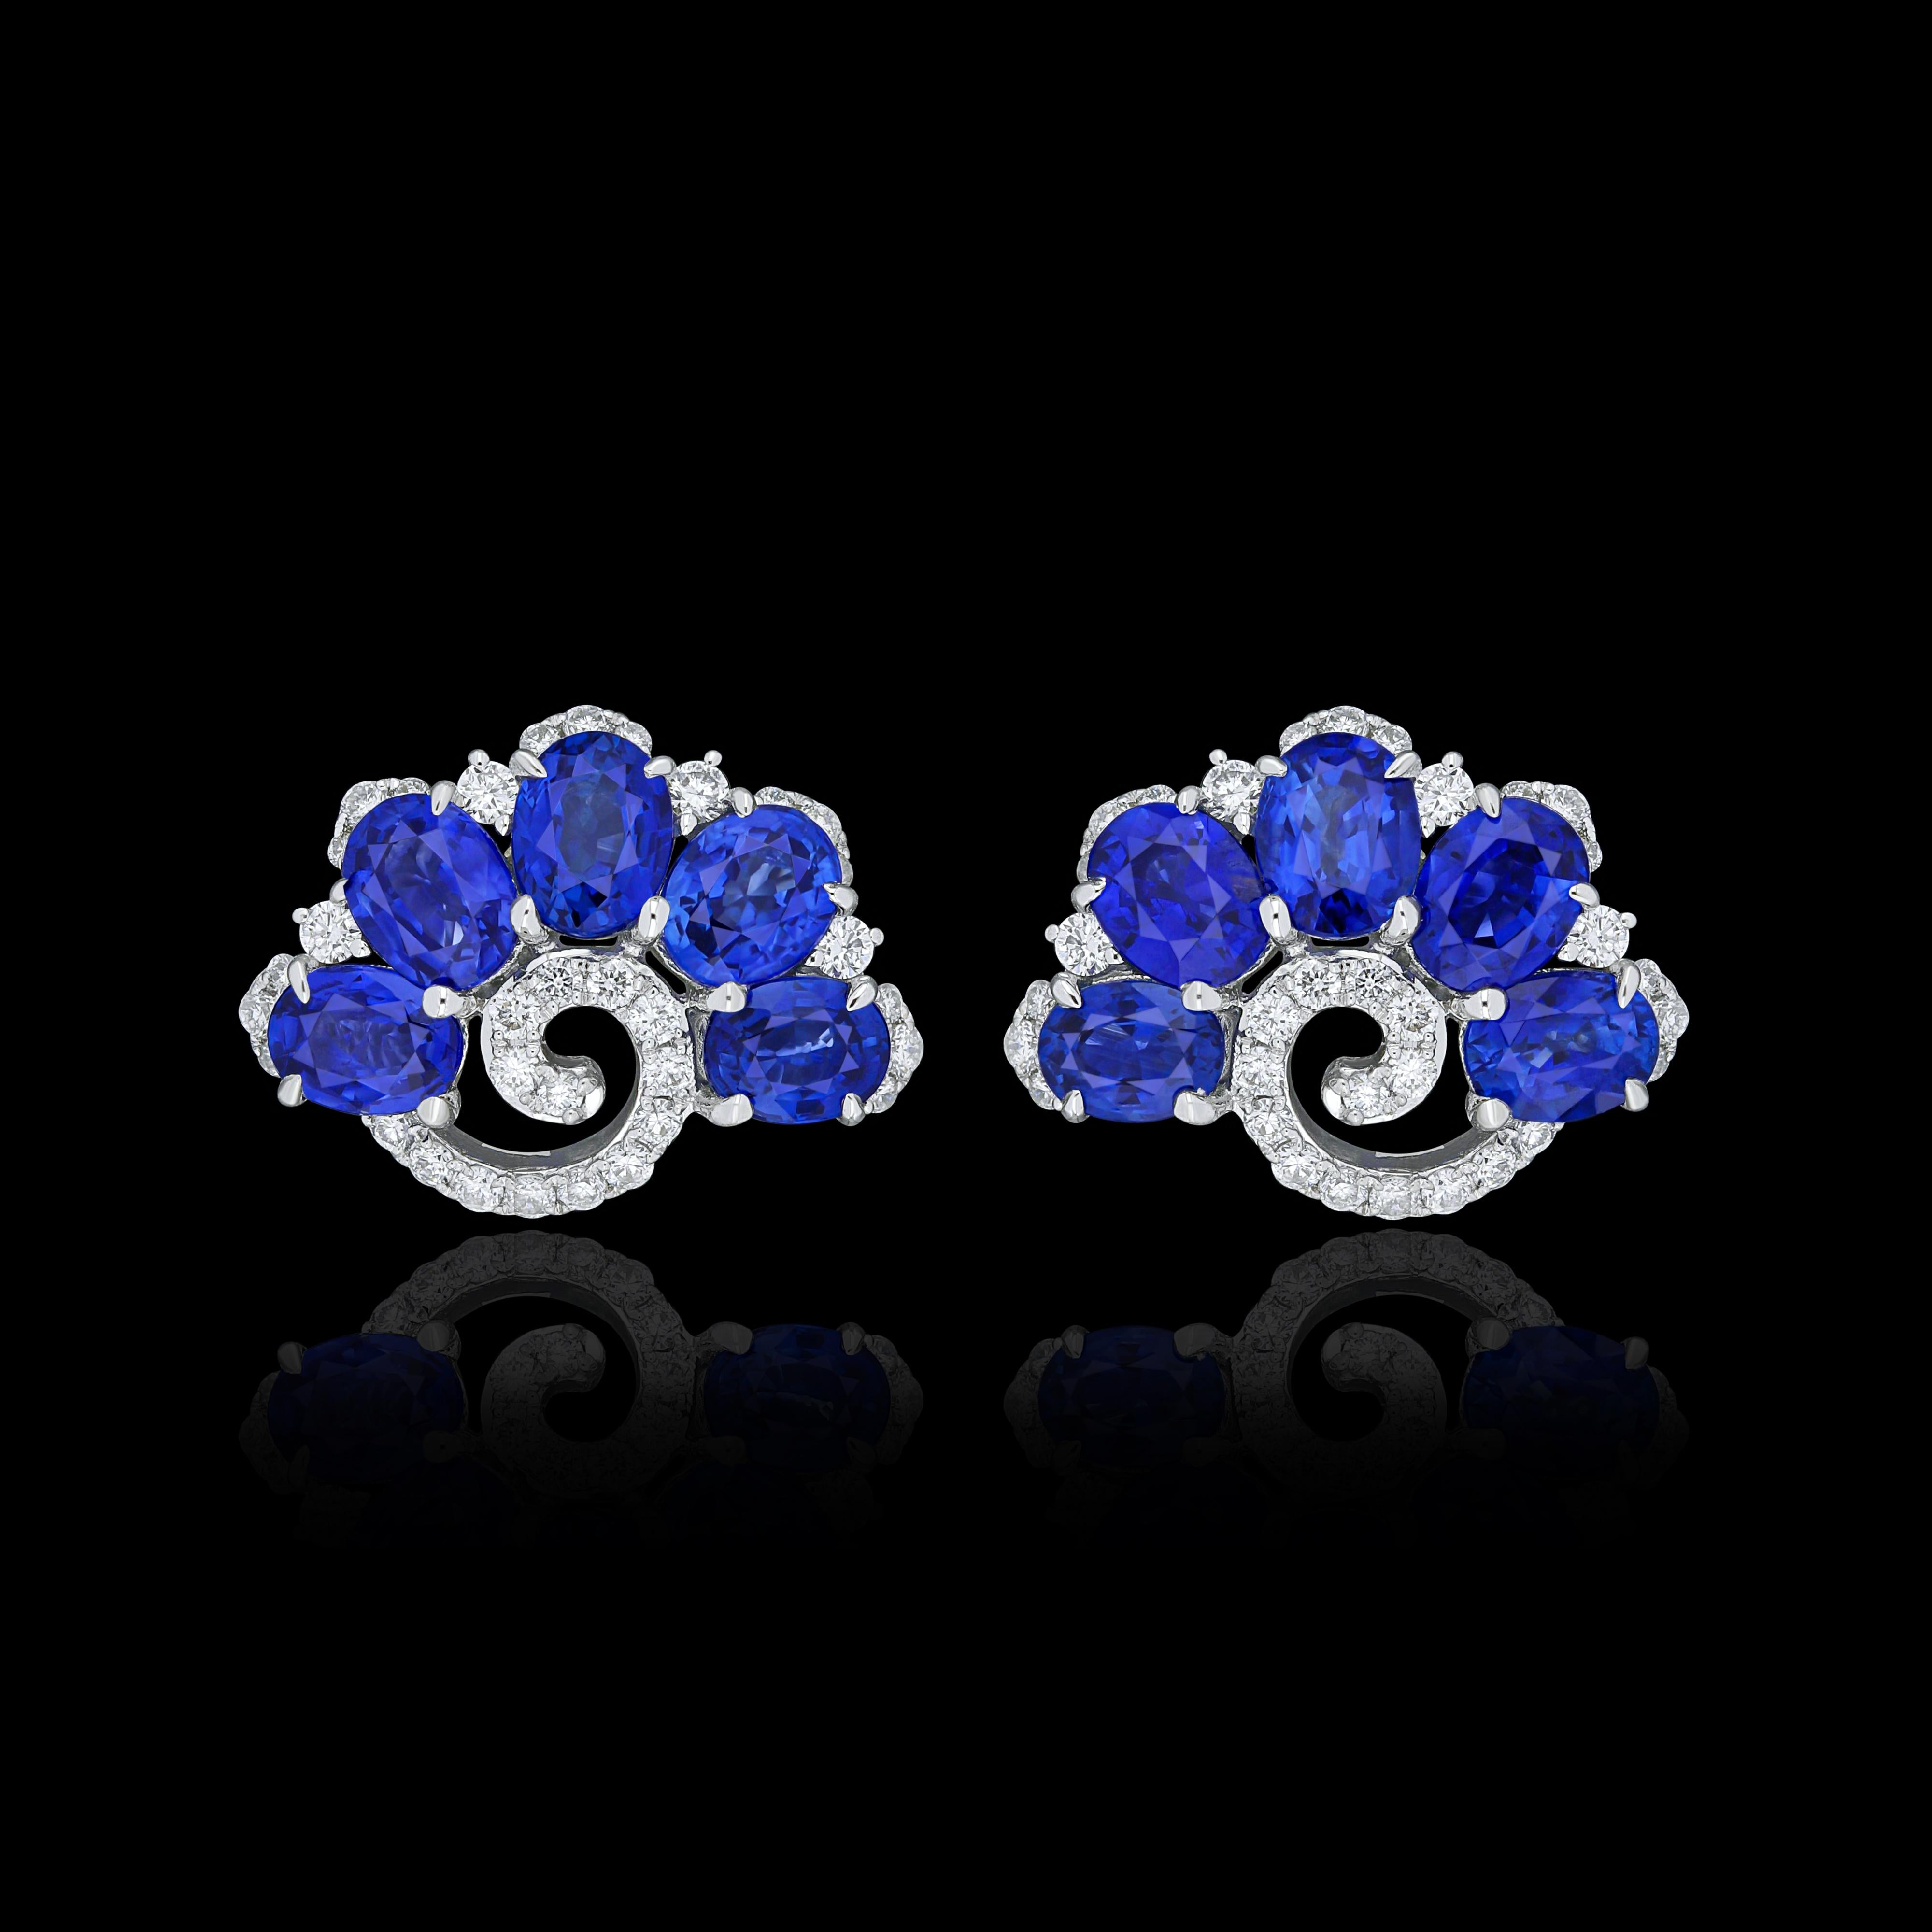 Elegant and exquisitely detailed 18 Karat White Gold Earring, center set with 2.55Cts .Oval Shape Blue Sapphire and micro pave set Diamonds, weighing approx. 0.33Cts Beautifully Hand crafted in 18 Karat White Gold.

Stone Detail:
Blue Sapphire: